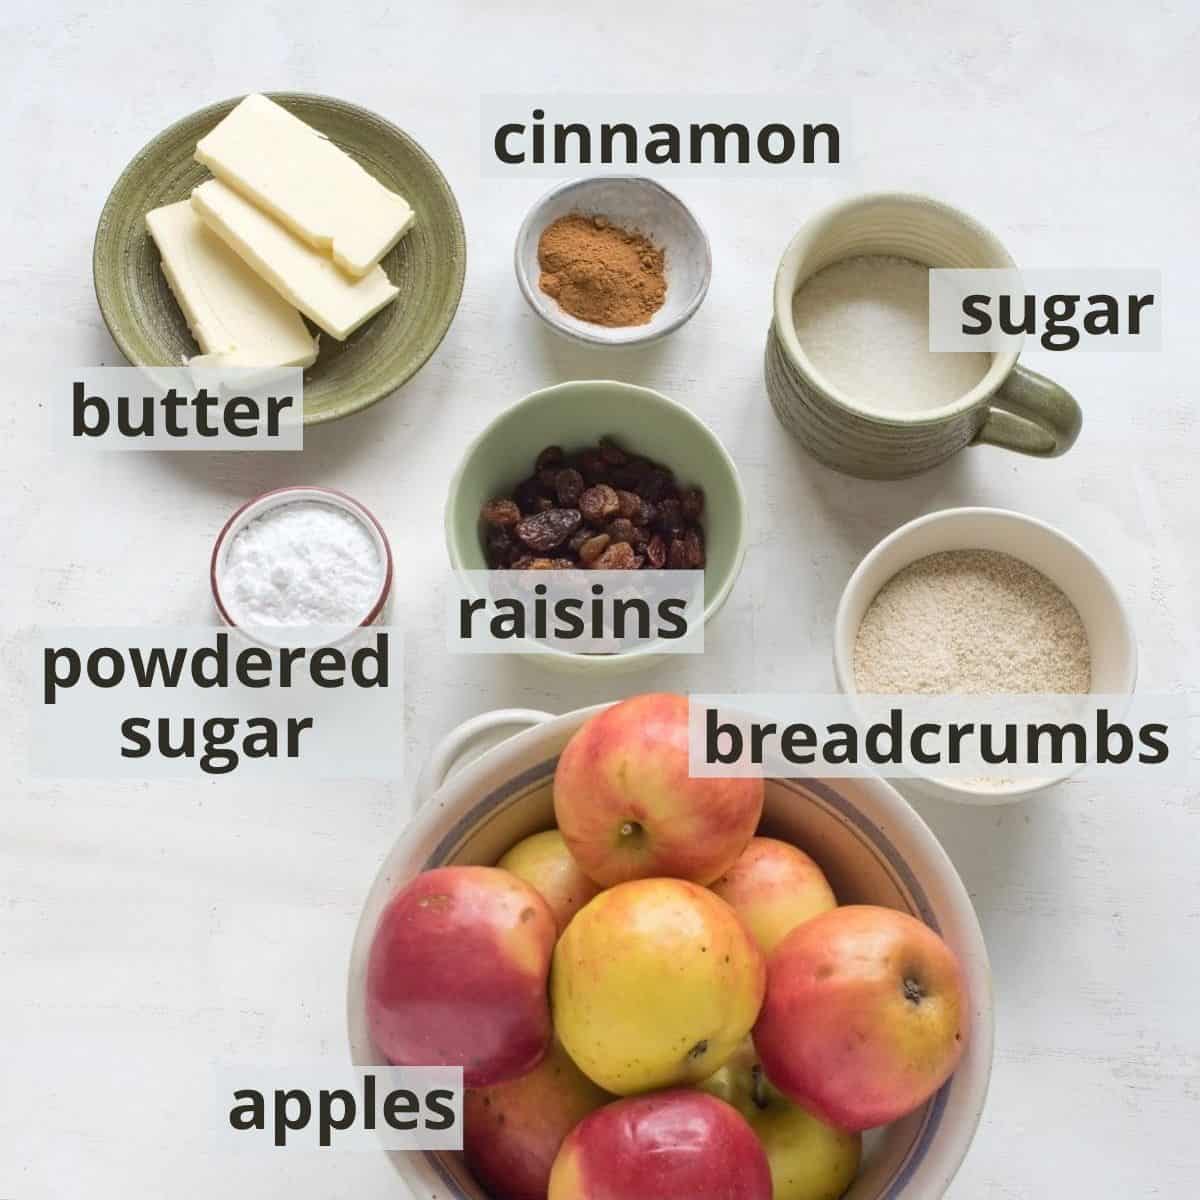 Ingredients for apple strudel filling, inclusive captions.